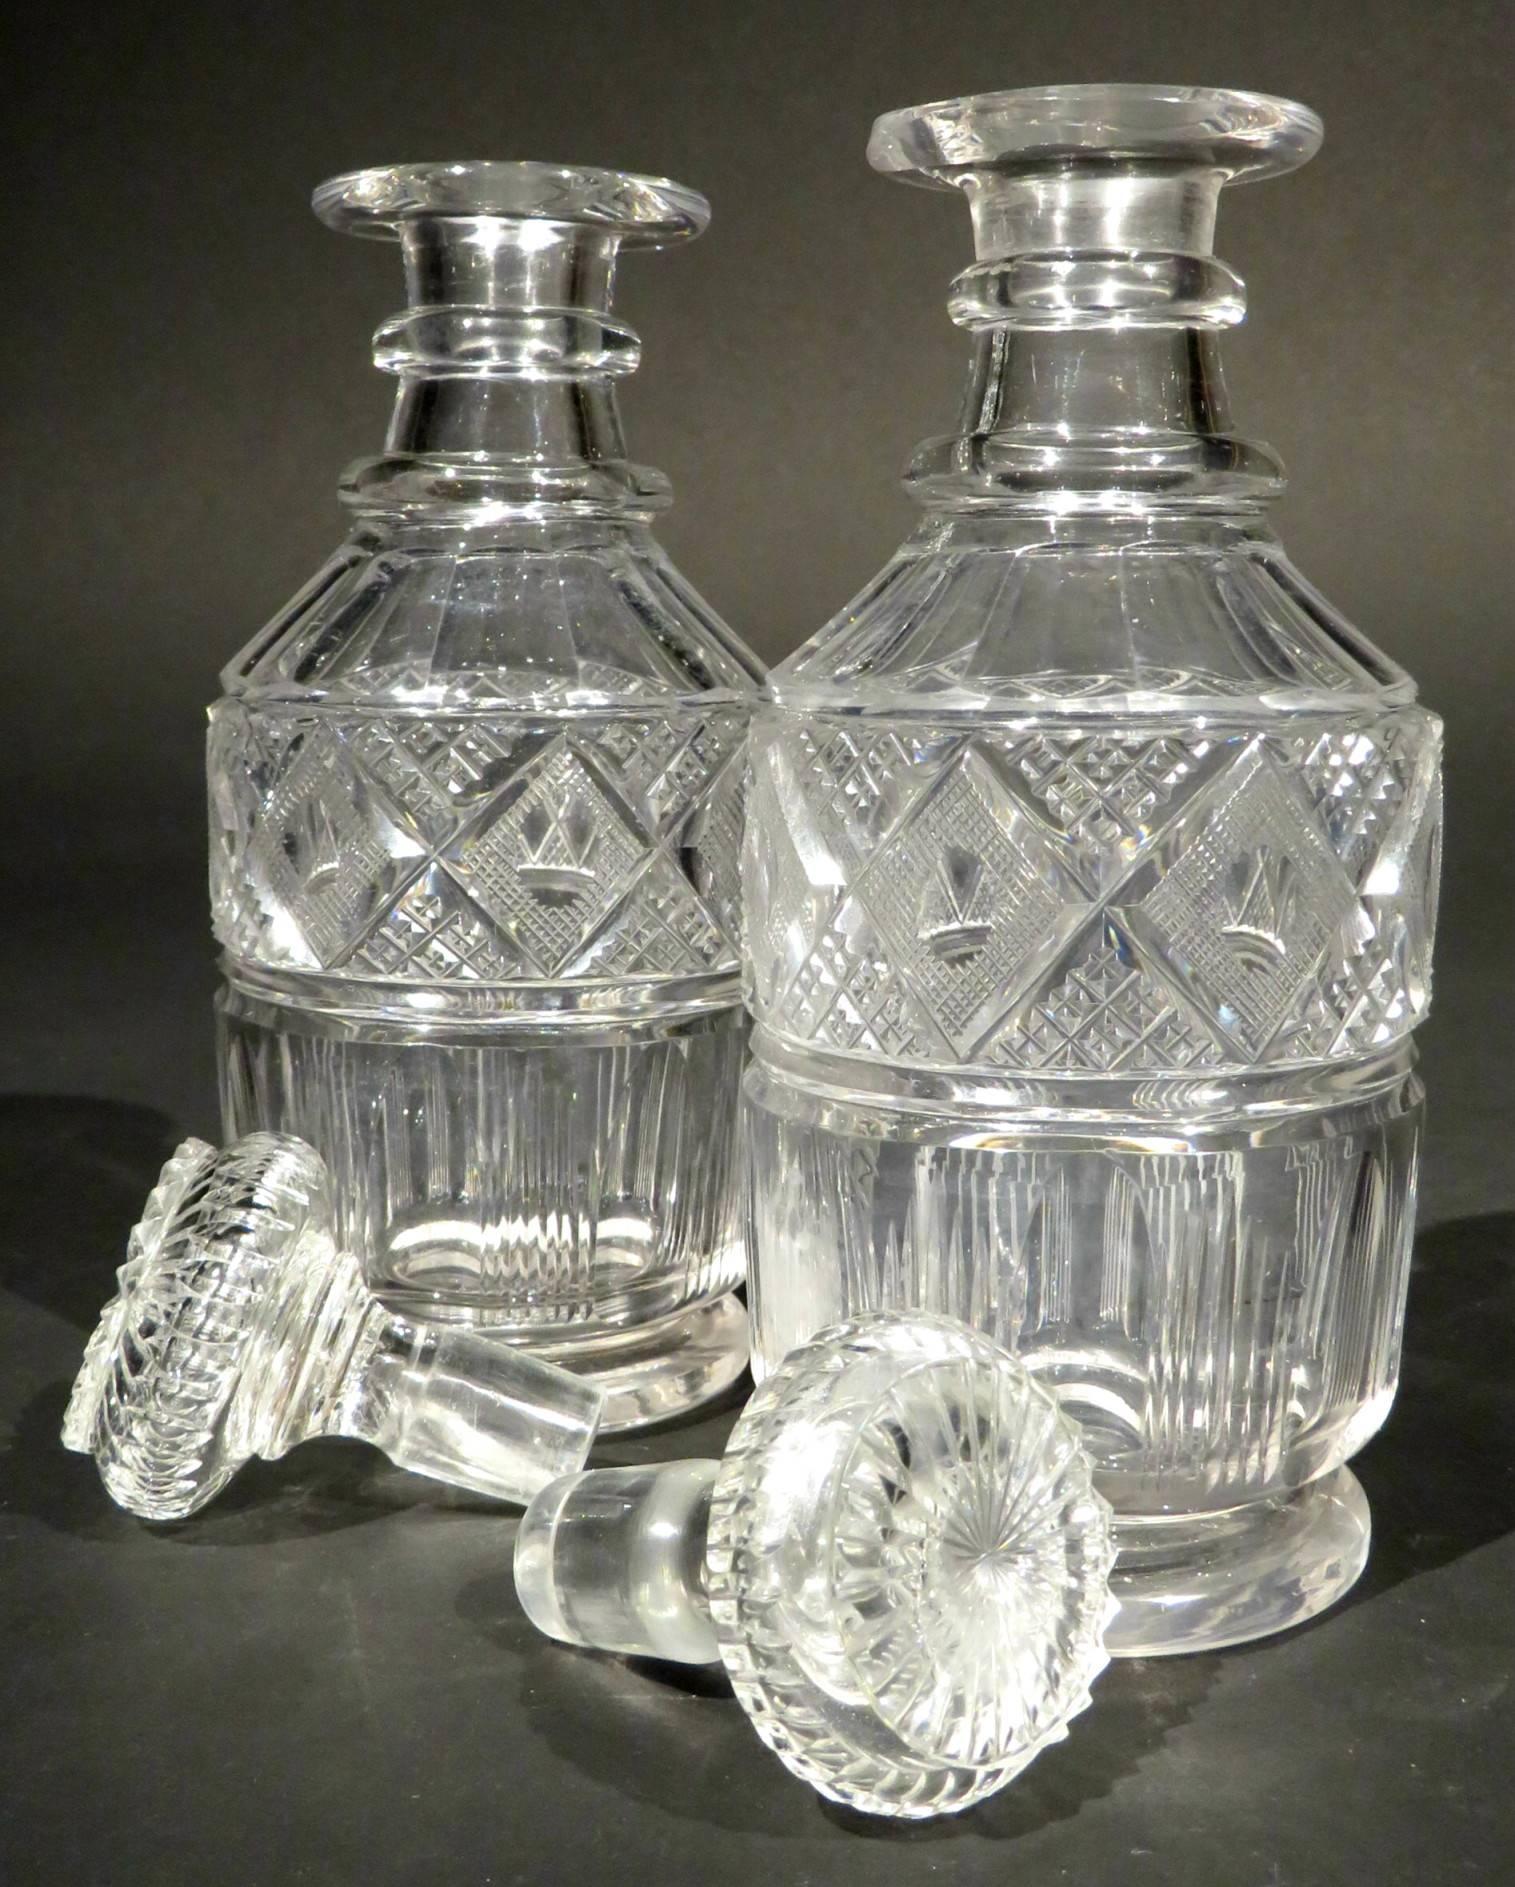 A fine pair of early 19th century cut-glass pint spirit decanters showing straight sided bodies with faceted, fluted & diamond cut detail, rising to double ringed necks with flaring rims fitted with their original dedicated stoppers, the undersides